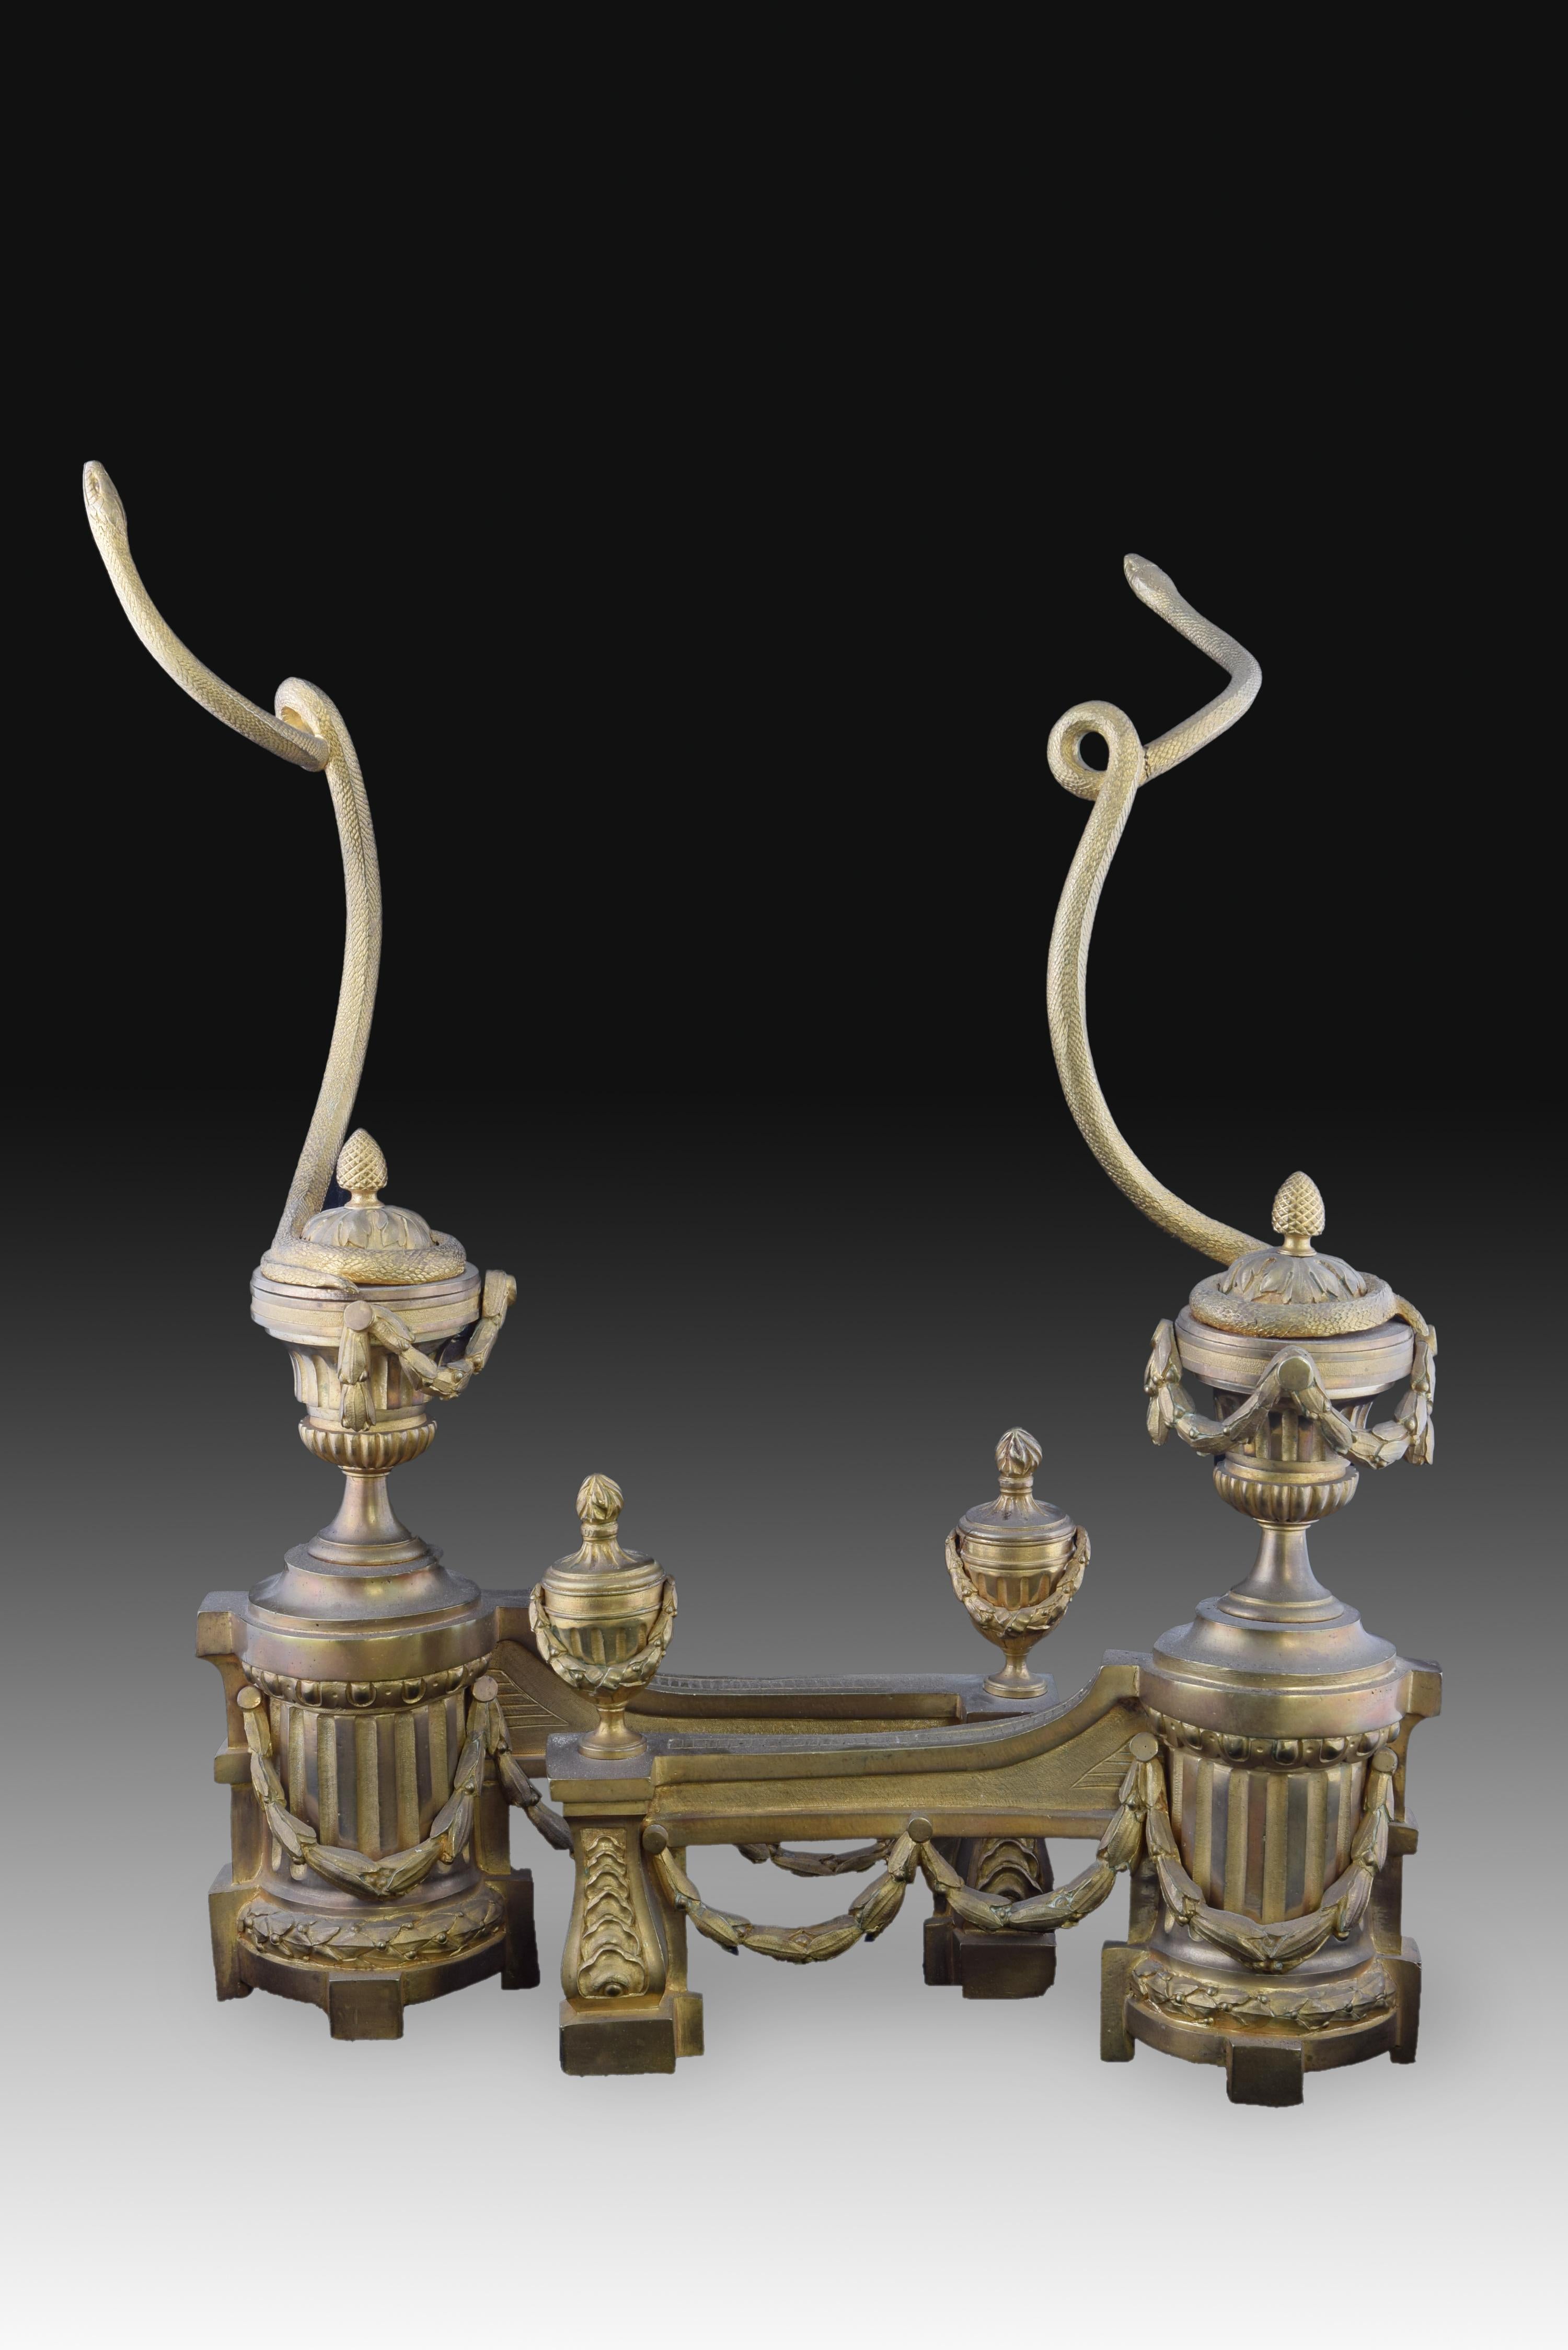 Pair of morillos. Bronze, iron France, 19th century 
Pair of morillos for chimney with architectural decorations of strong classical influence (vases, garlands, ribbed pedestals, clean lines, etc.) that have two snakes curled by their tail to the